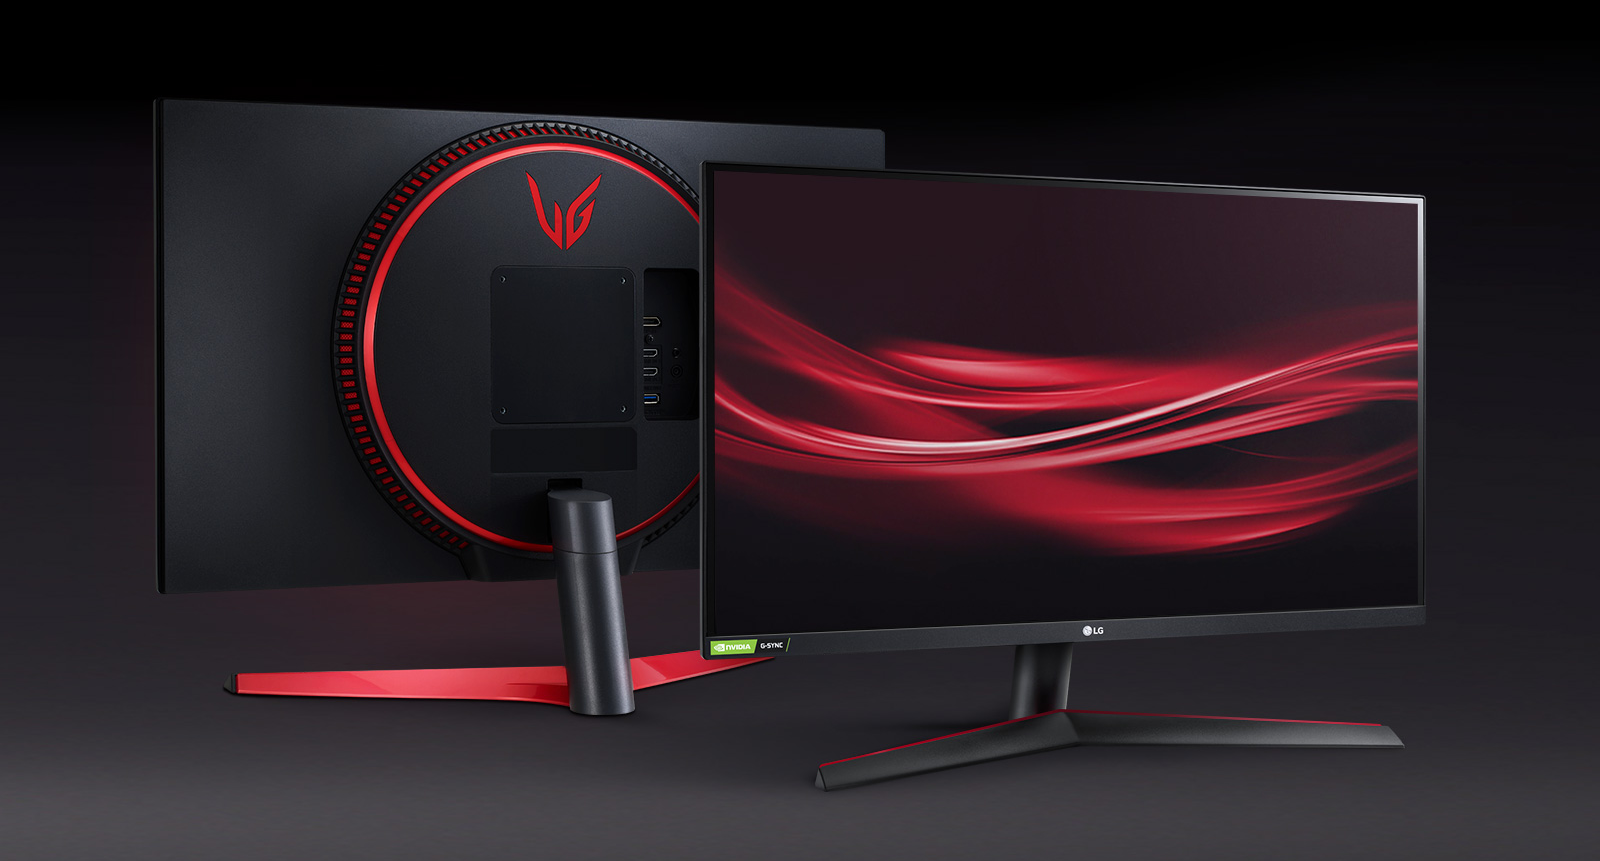 LG 27GN800-B: 27-inch and gaming monitor with NVIDIA G-Sync, AMD Premium and 144 Hz support announced - NotebookCheck.net News